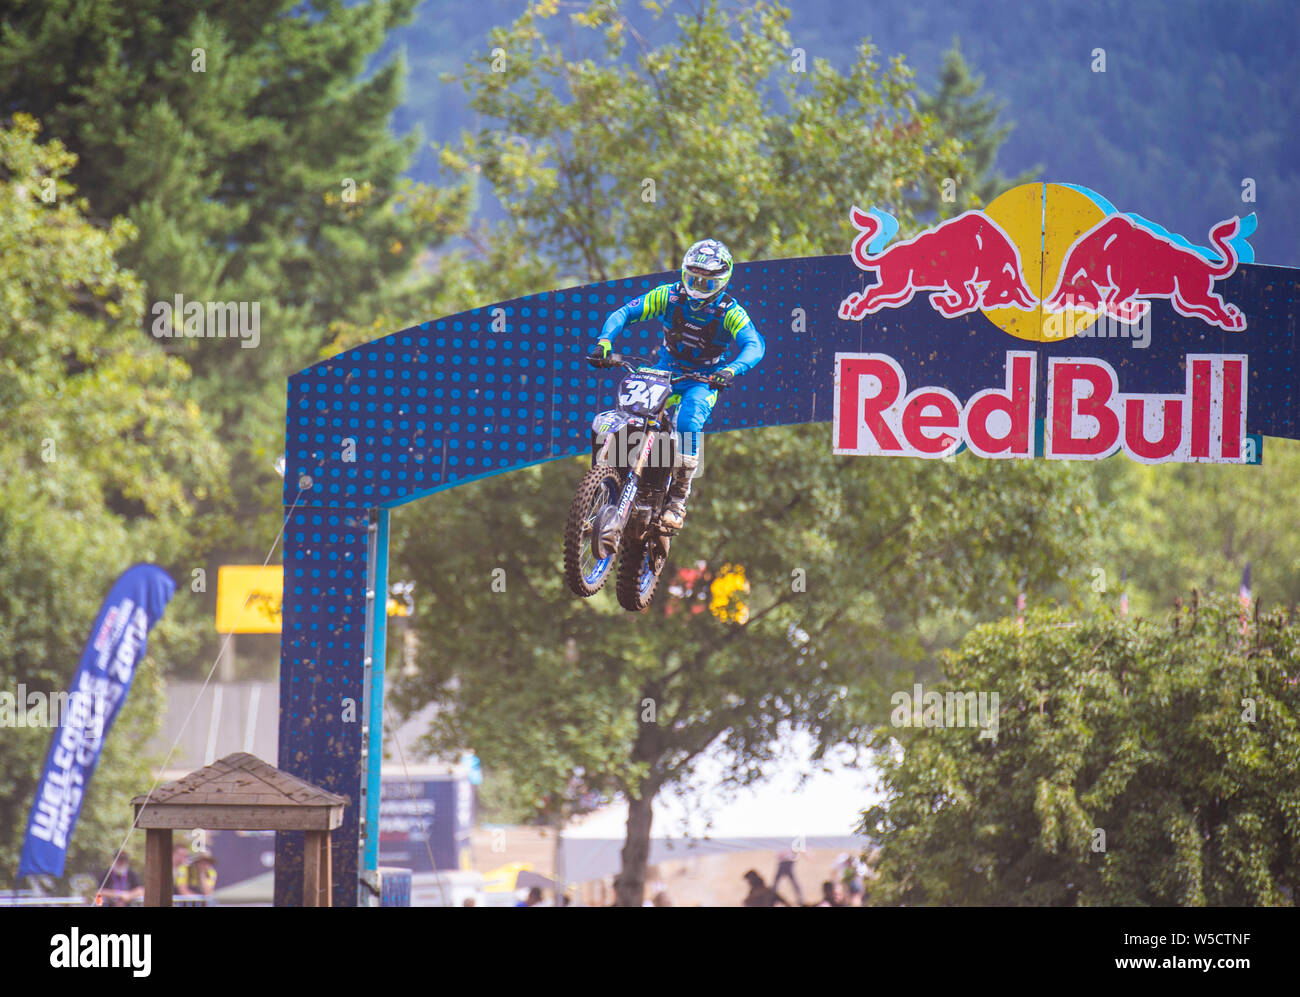 Washougal, USA. 27th July, 2019. # 34 Dylan Ferrandos gets air between turn 15 and 16 during the Lucas Oil Pro Motocross Washougal National 250 class championship at Washougal mx park Washougal, WA Thurman James/CSM/Alamy Live News Stock Photo